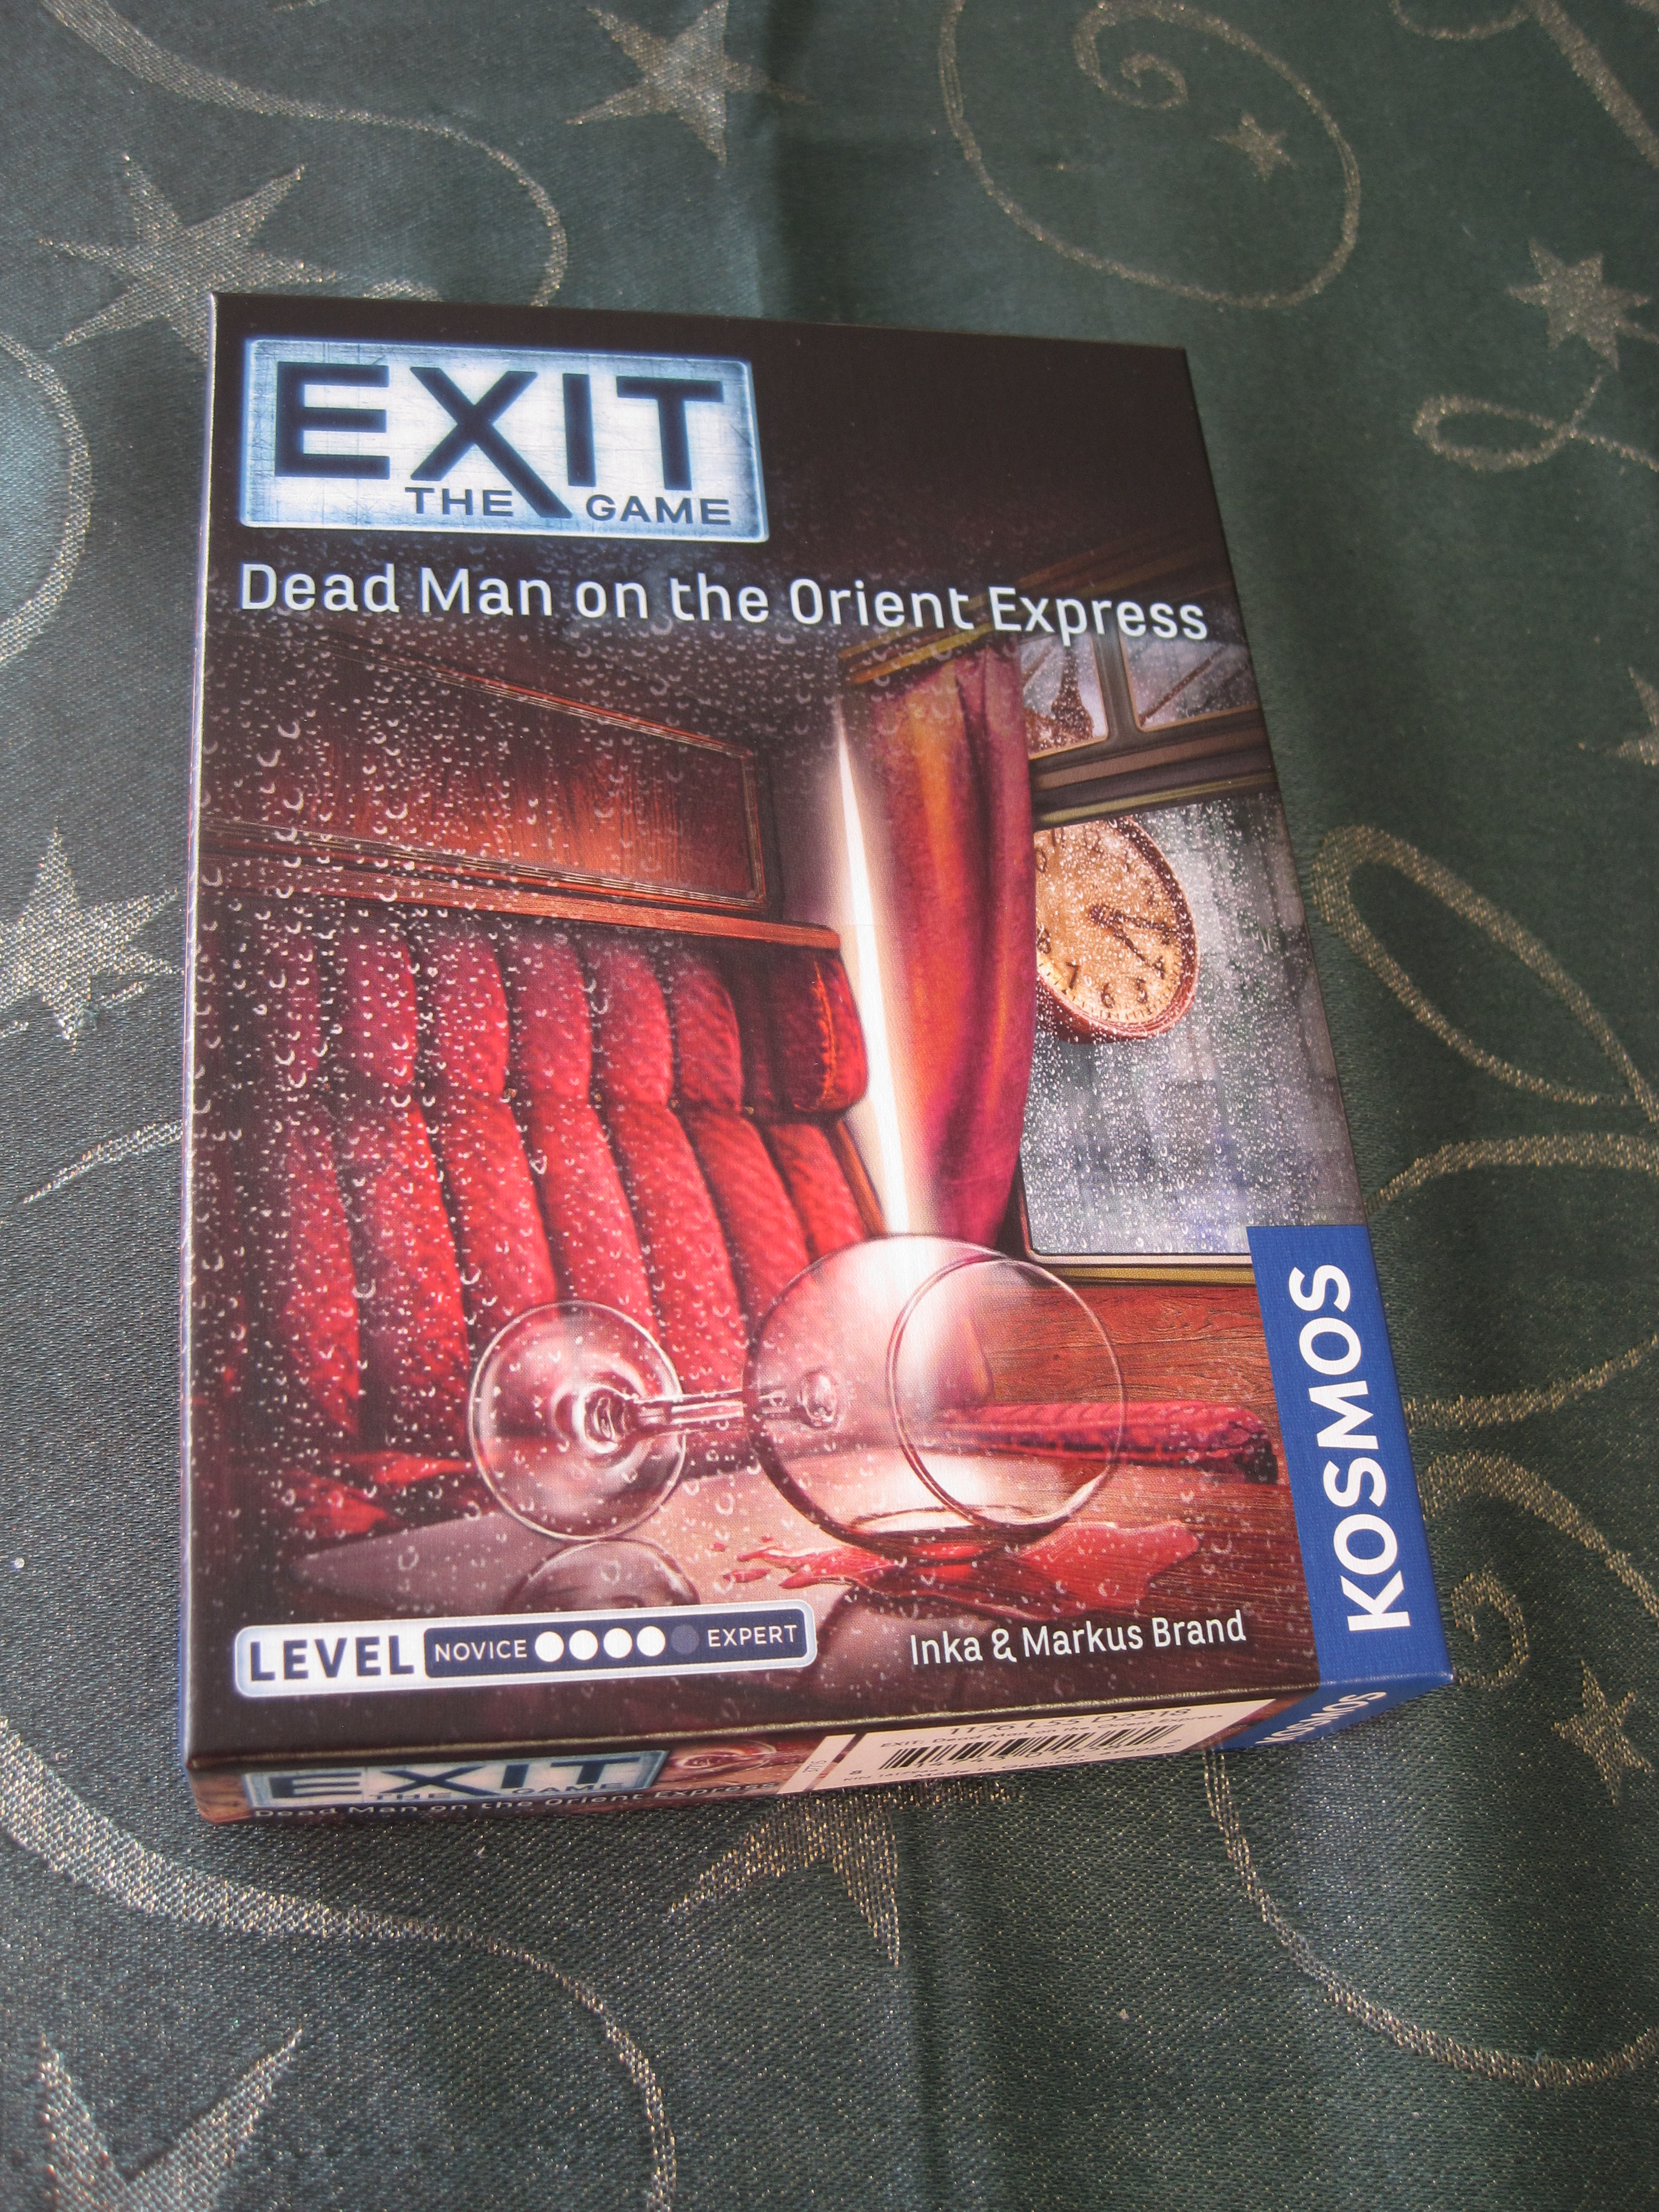 EXIT: Dead Man on the Orient Express - photo by Juliamaud